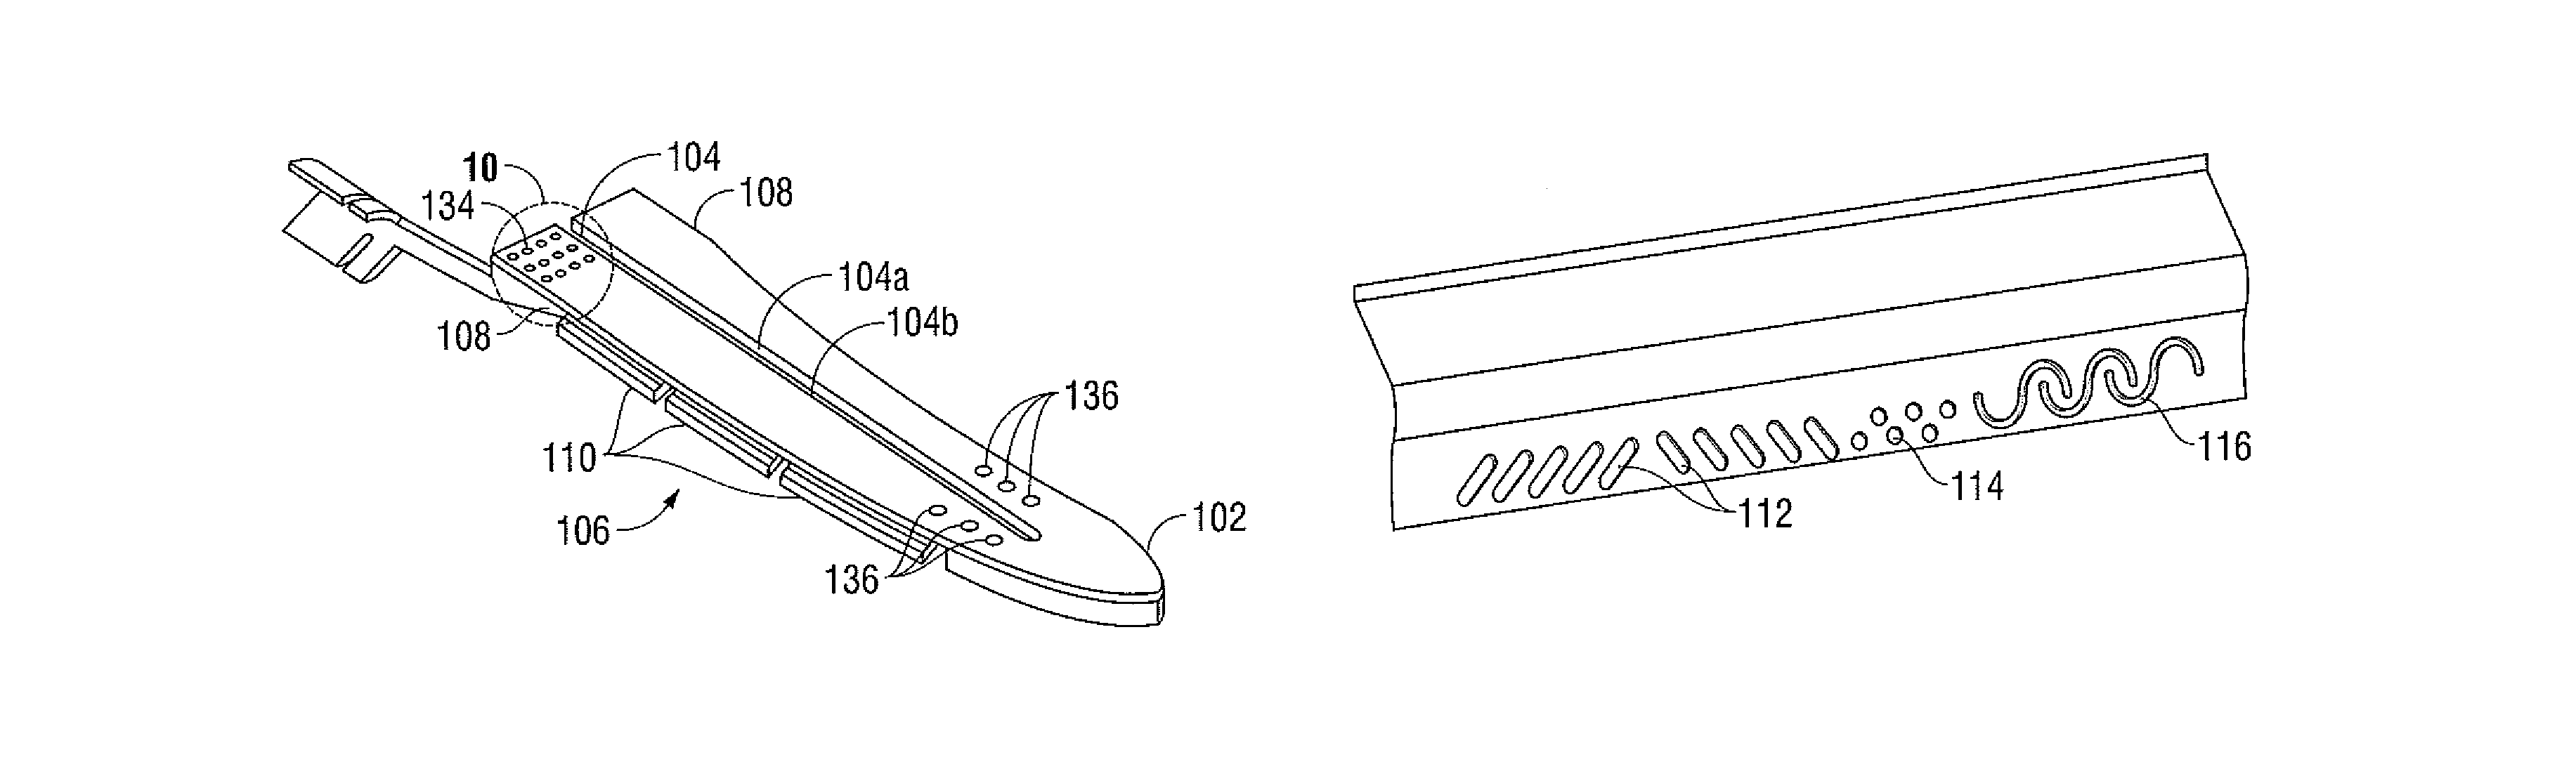 Method and system for manufacturing electrosurgical seal plates